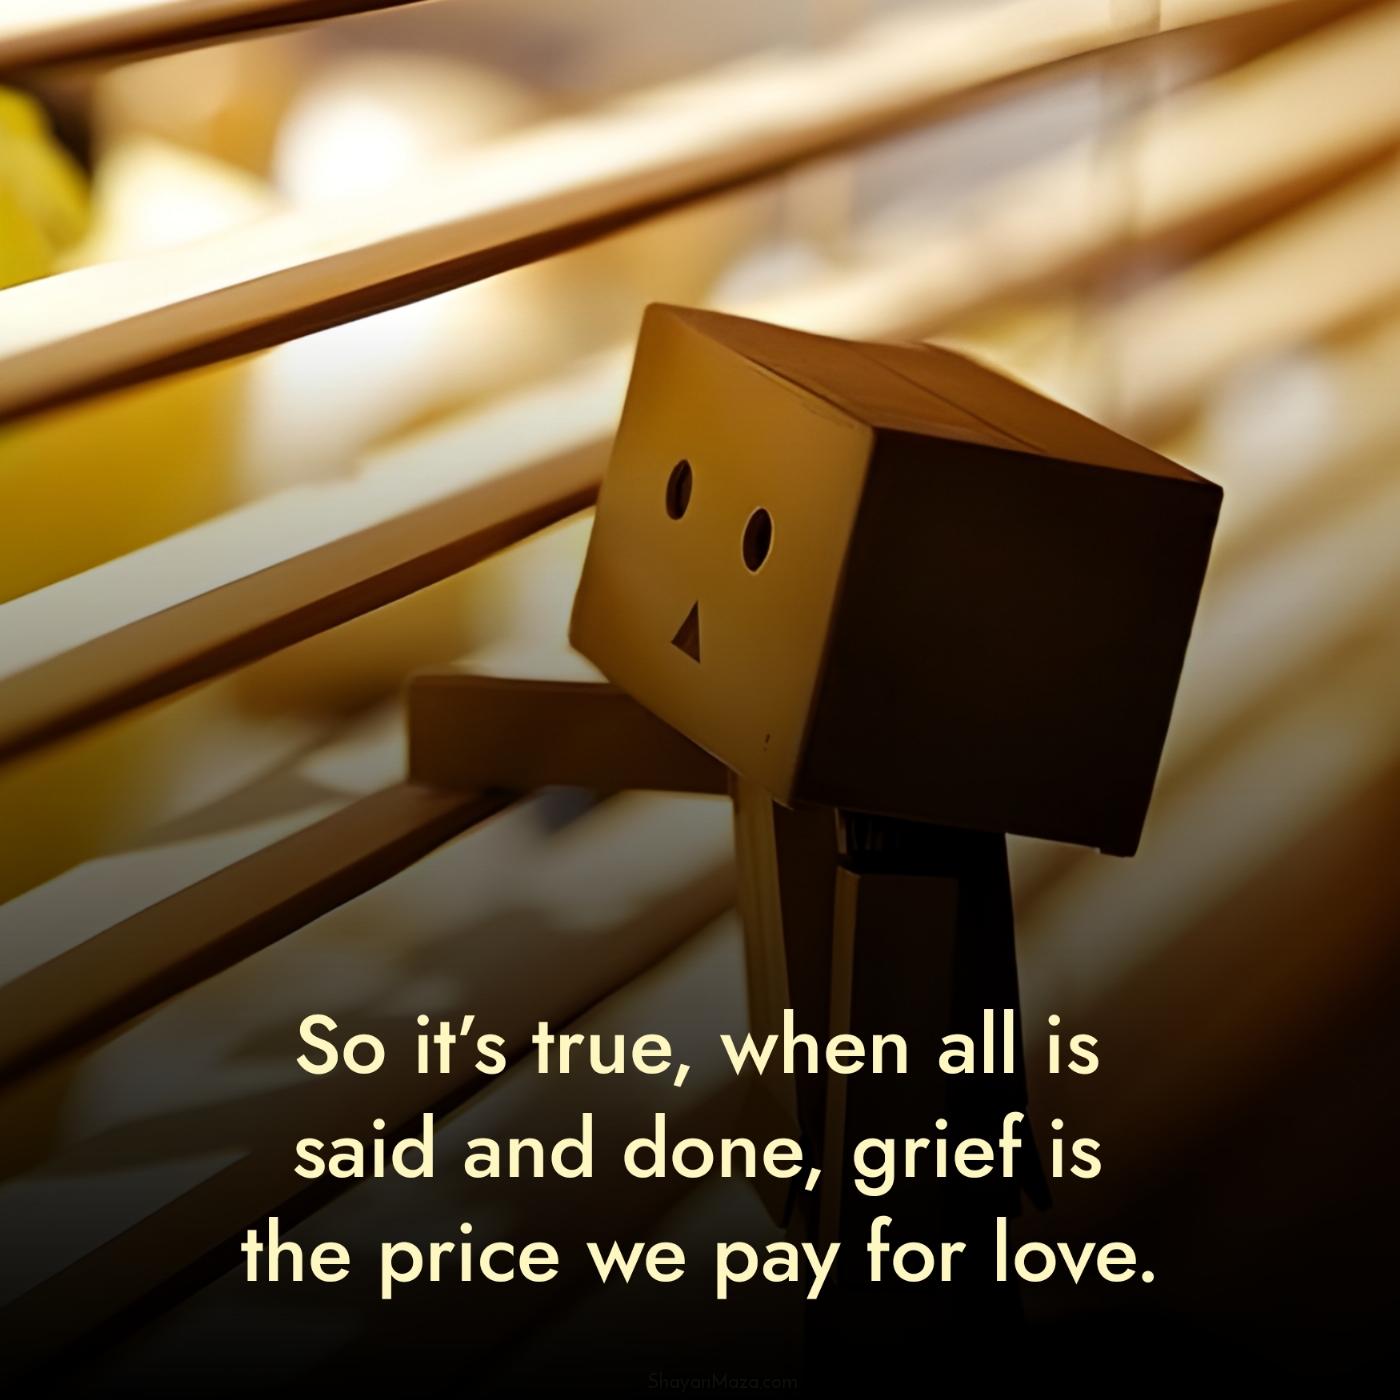 So its true when all is said and done grief is the price we pay